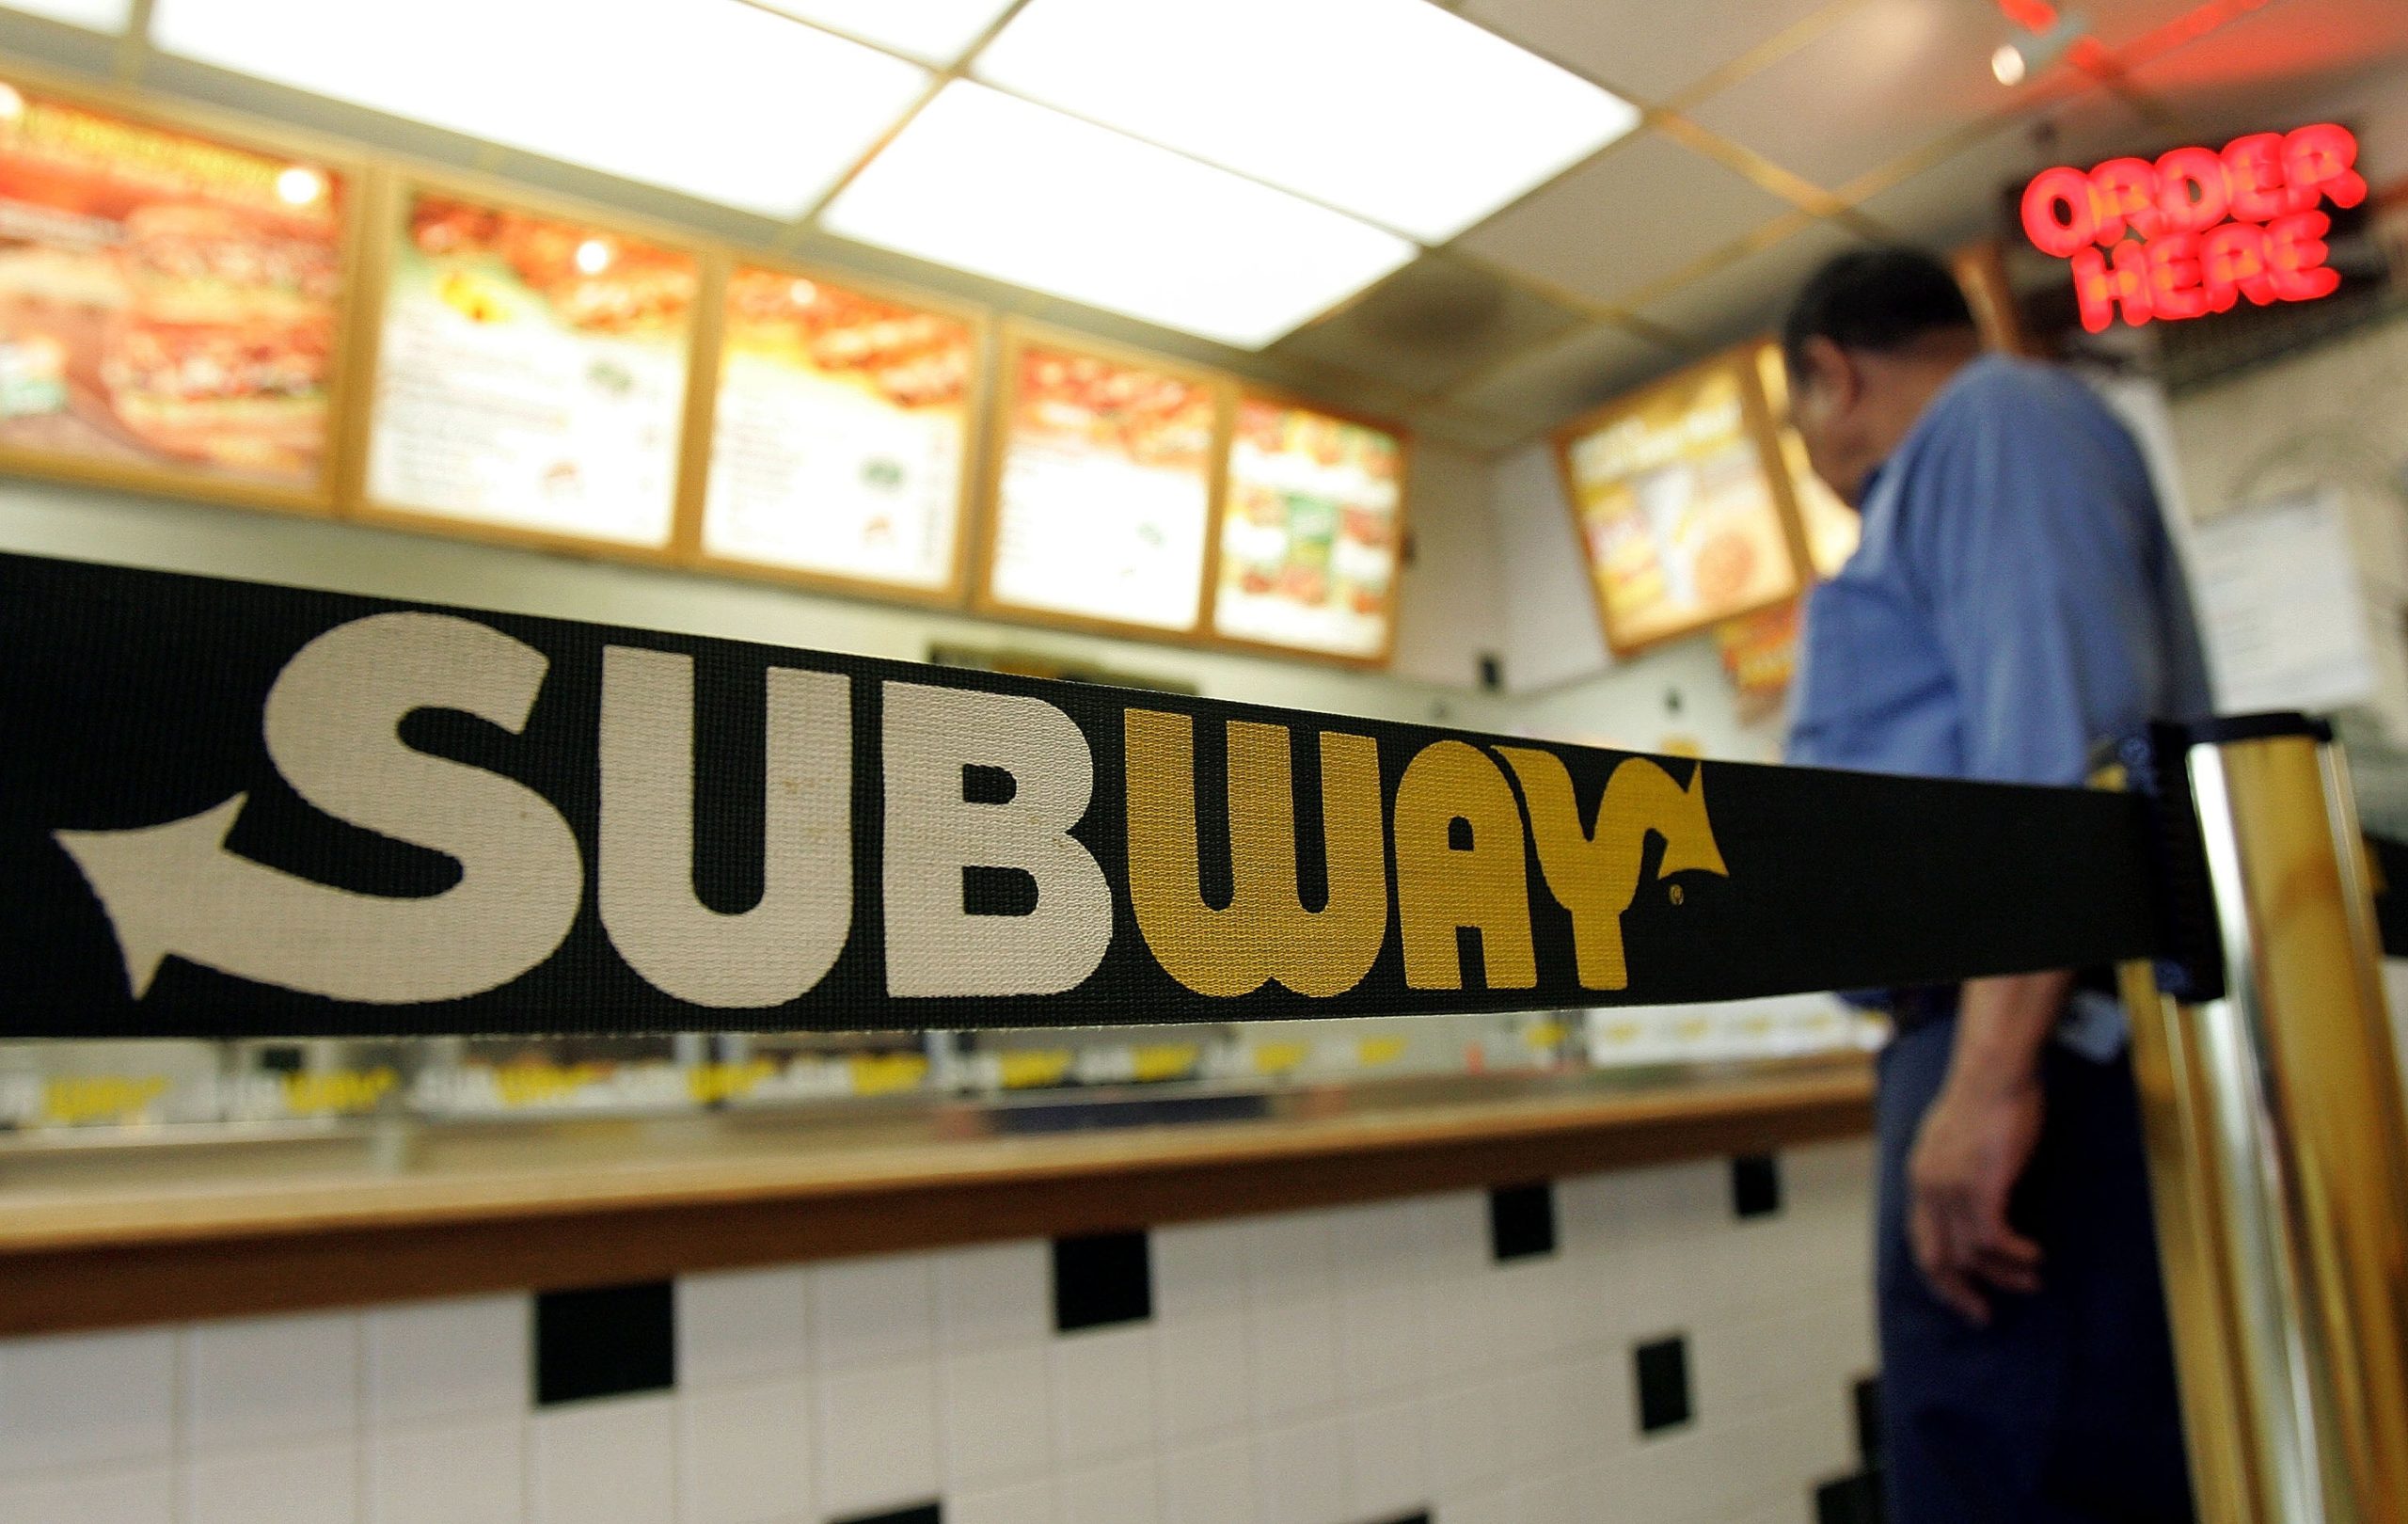 A person stands near signage while inside a Subway restaurant June 6, 2005, in Chicago, Illinois. (Photo: Tim Boyle, Getty Images)